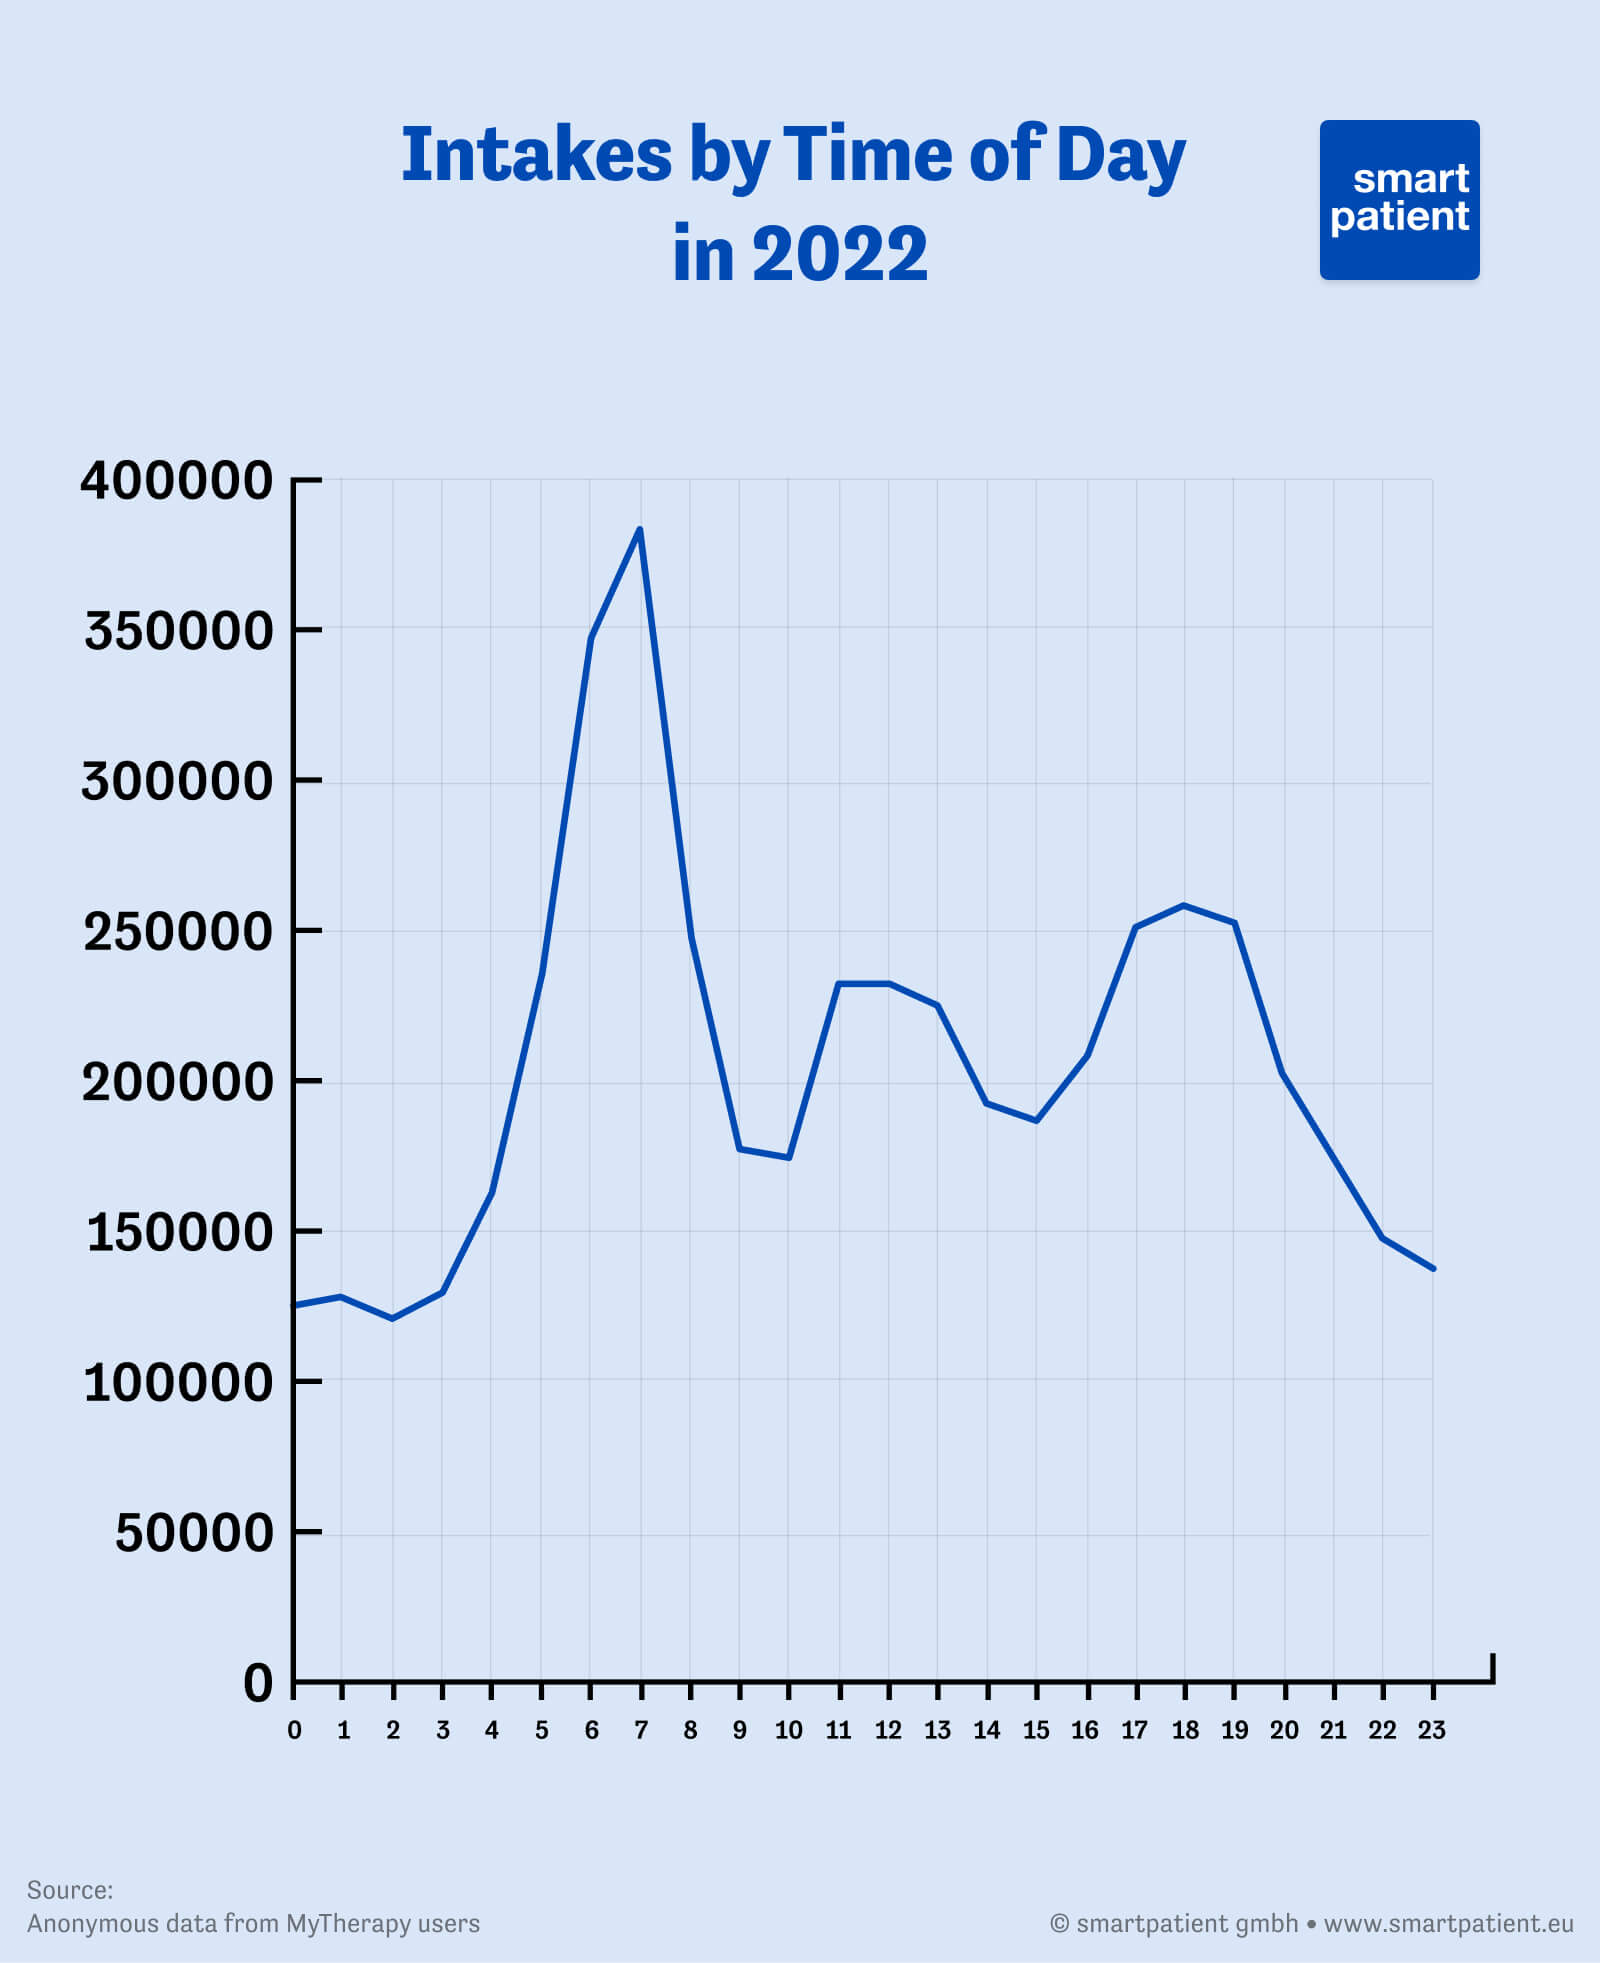 graph showing MyTherapy intake patterns between 2014 and 2022, with peaks in the morning at roughly 7 am, at lunchtime, and in the evening at roughly 6 PM